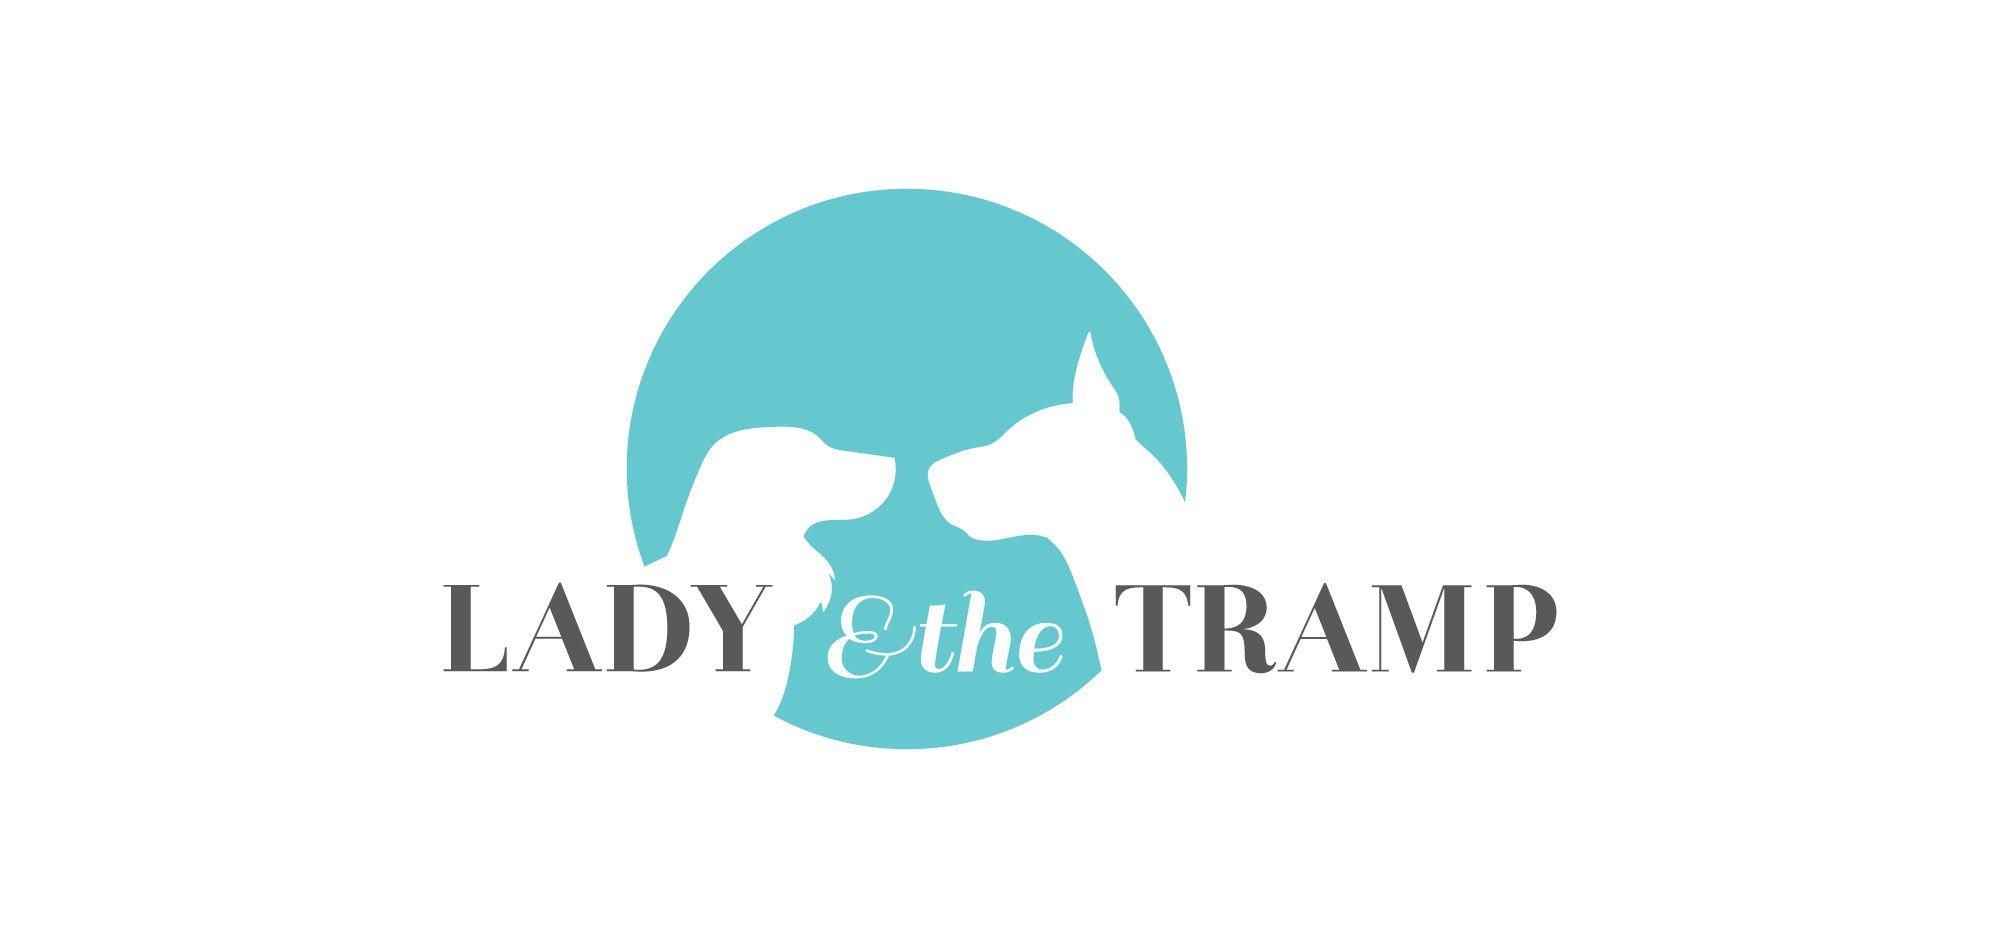 Lady and the Tramp Logo - Lady & the Tramp's Business Branding - Logo design, website design